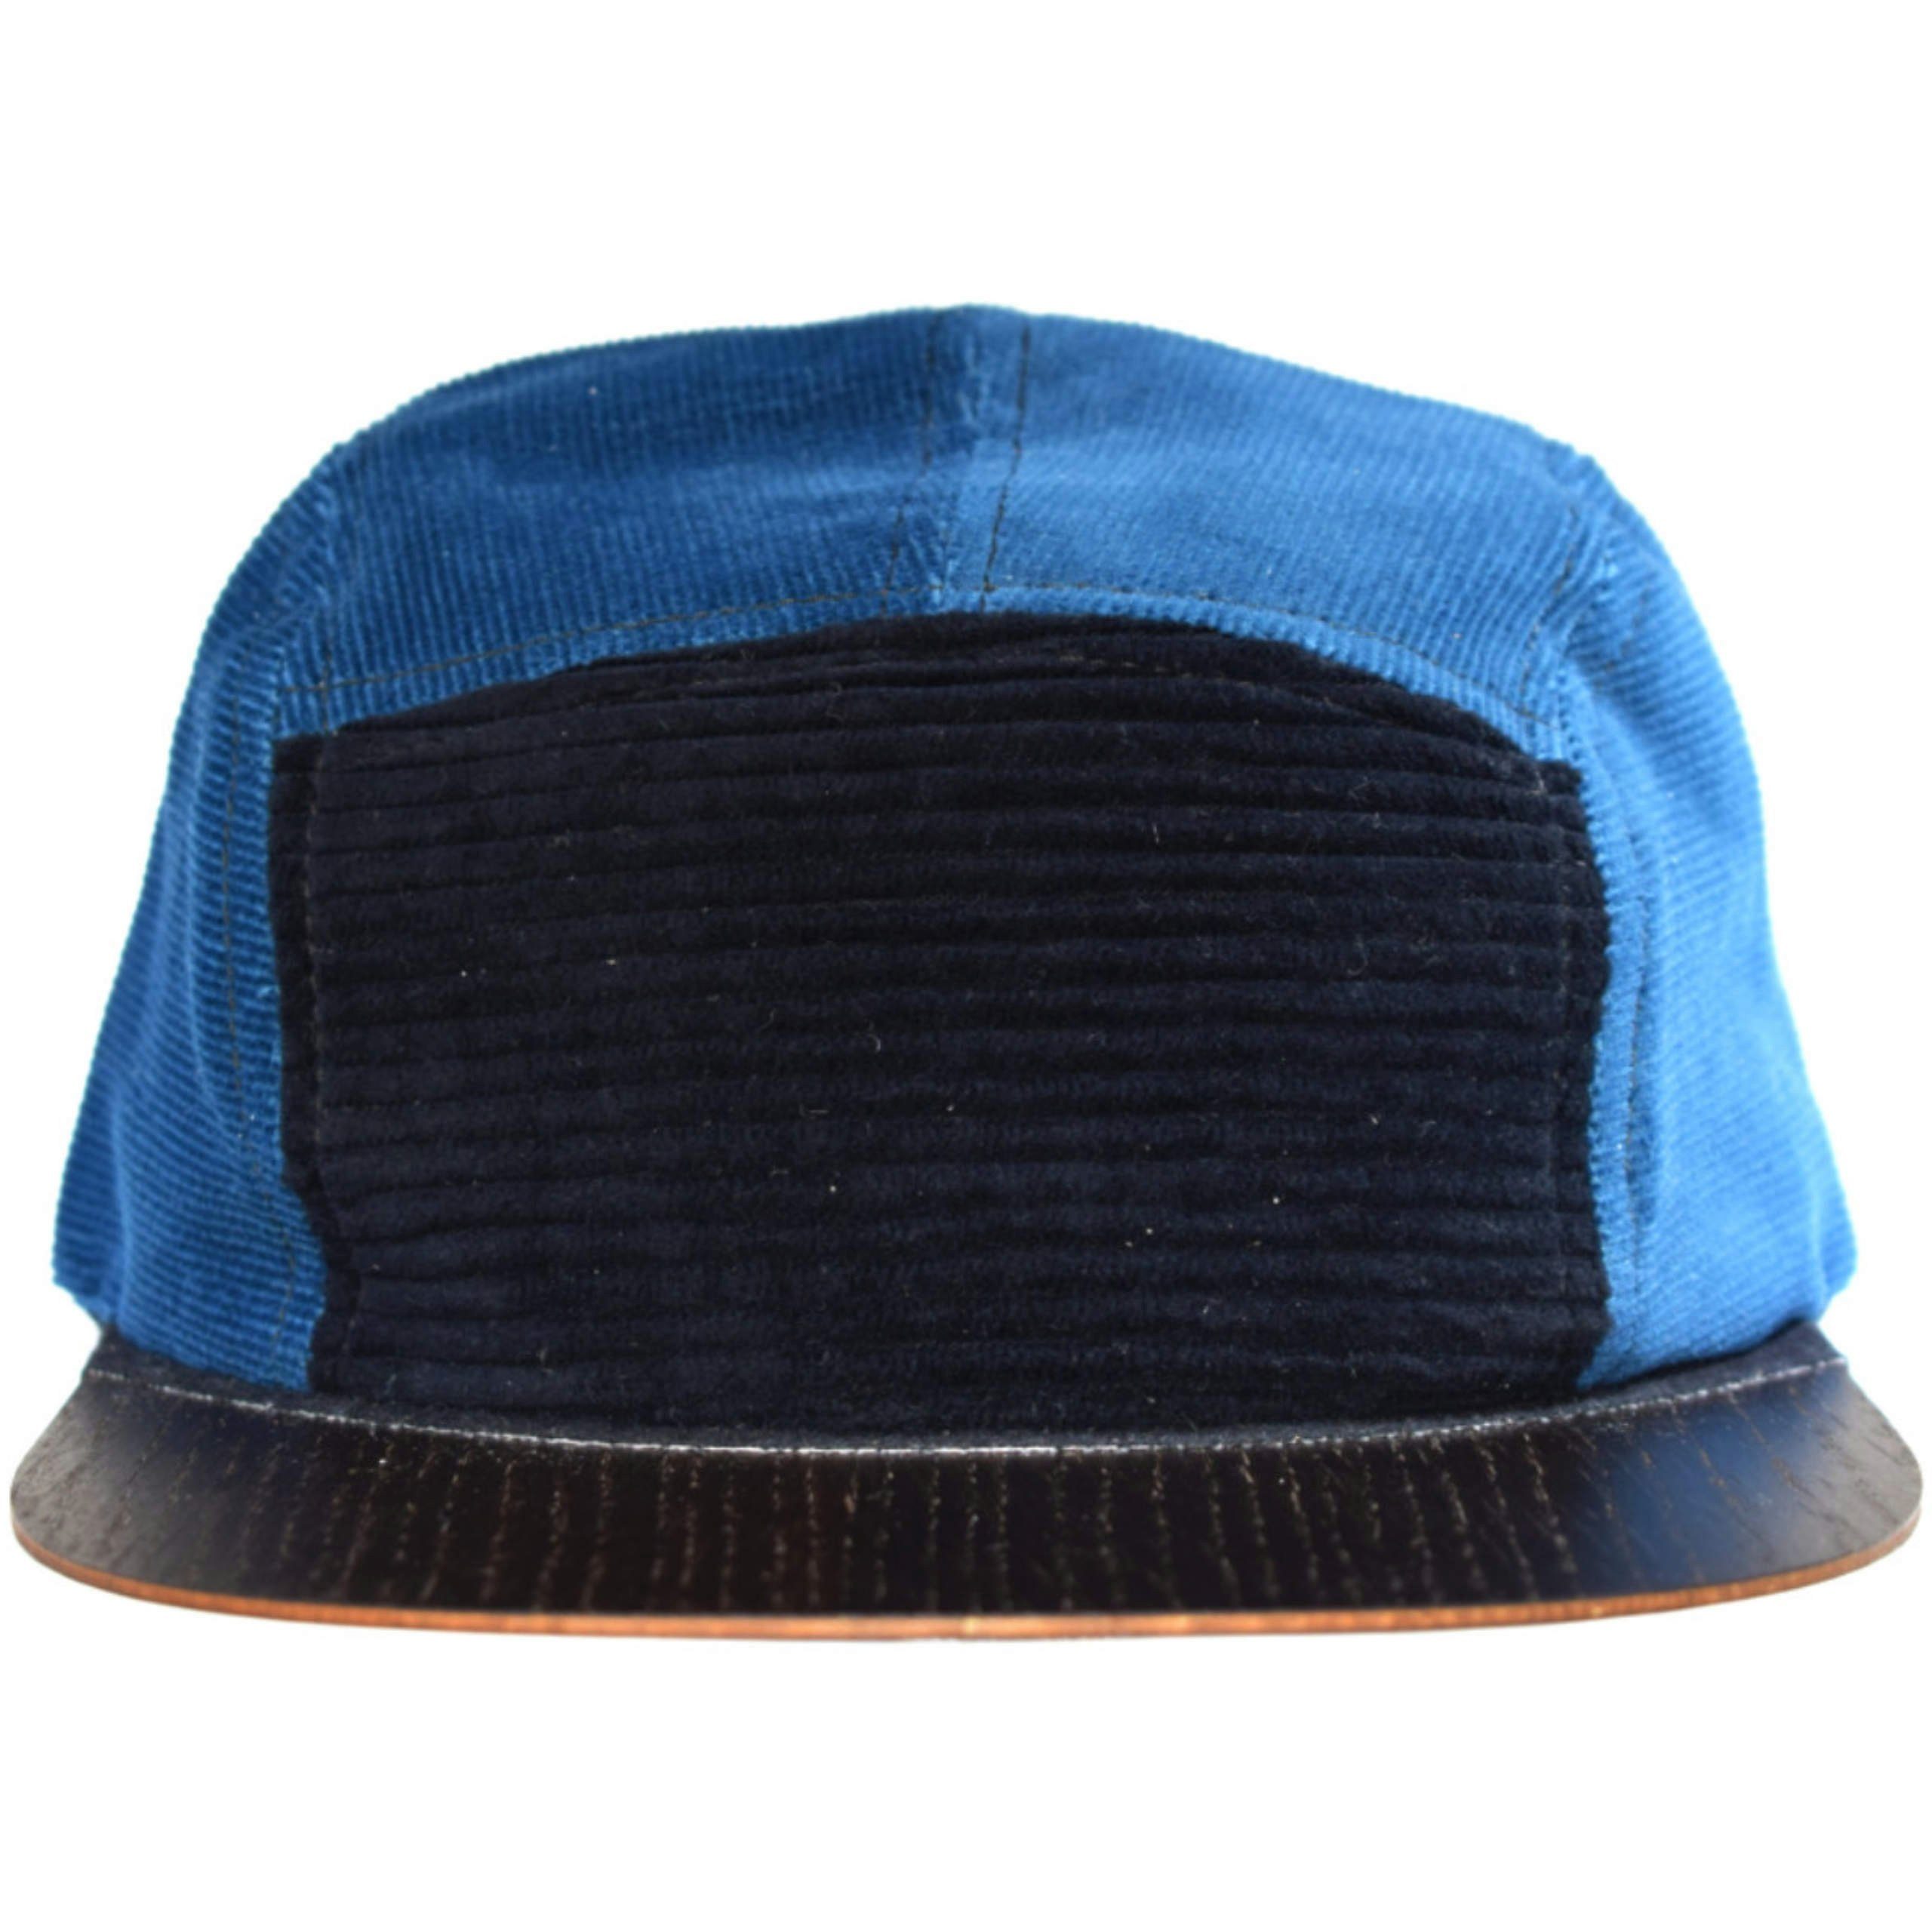 Blau Holzschild Germany Lou-i Cord Cap Snapback Cap Made in mit Holzschild